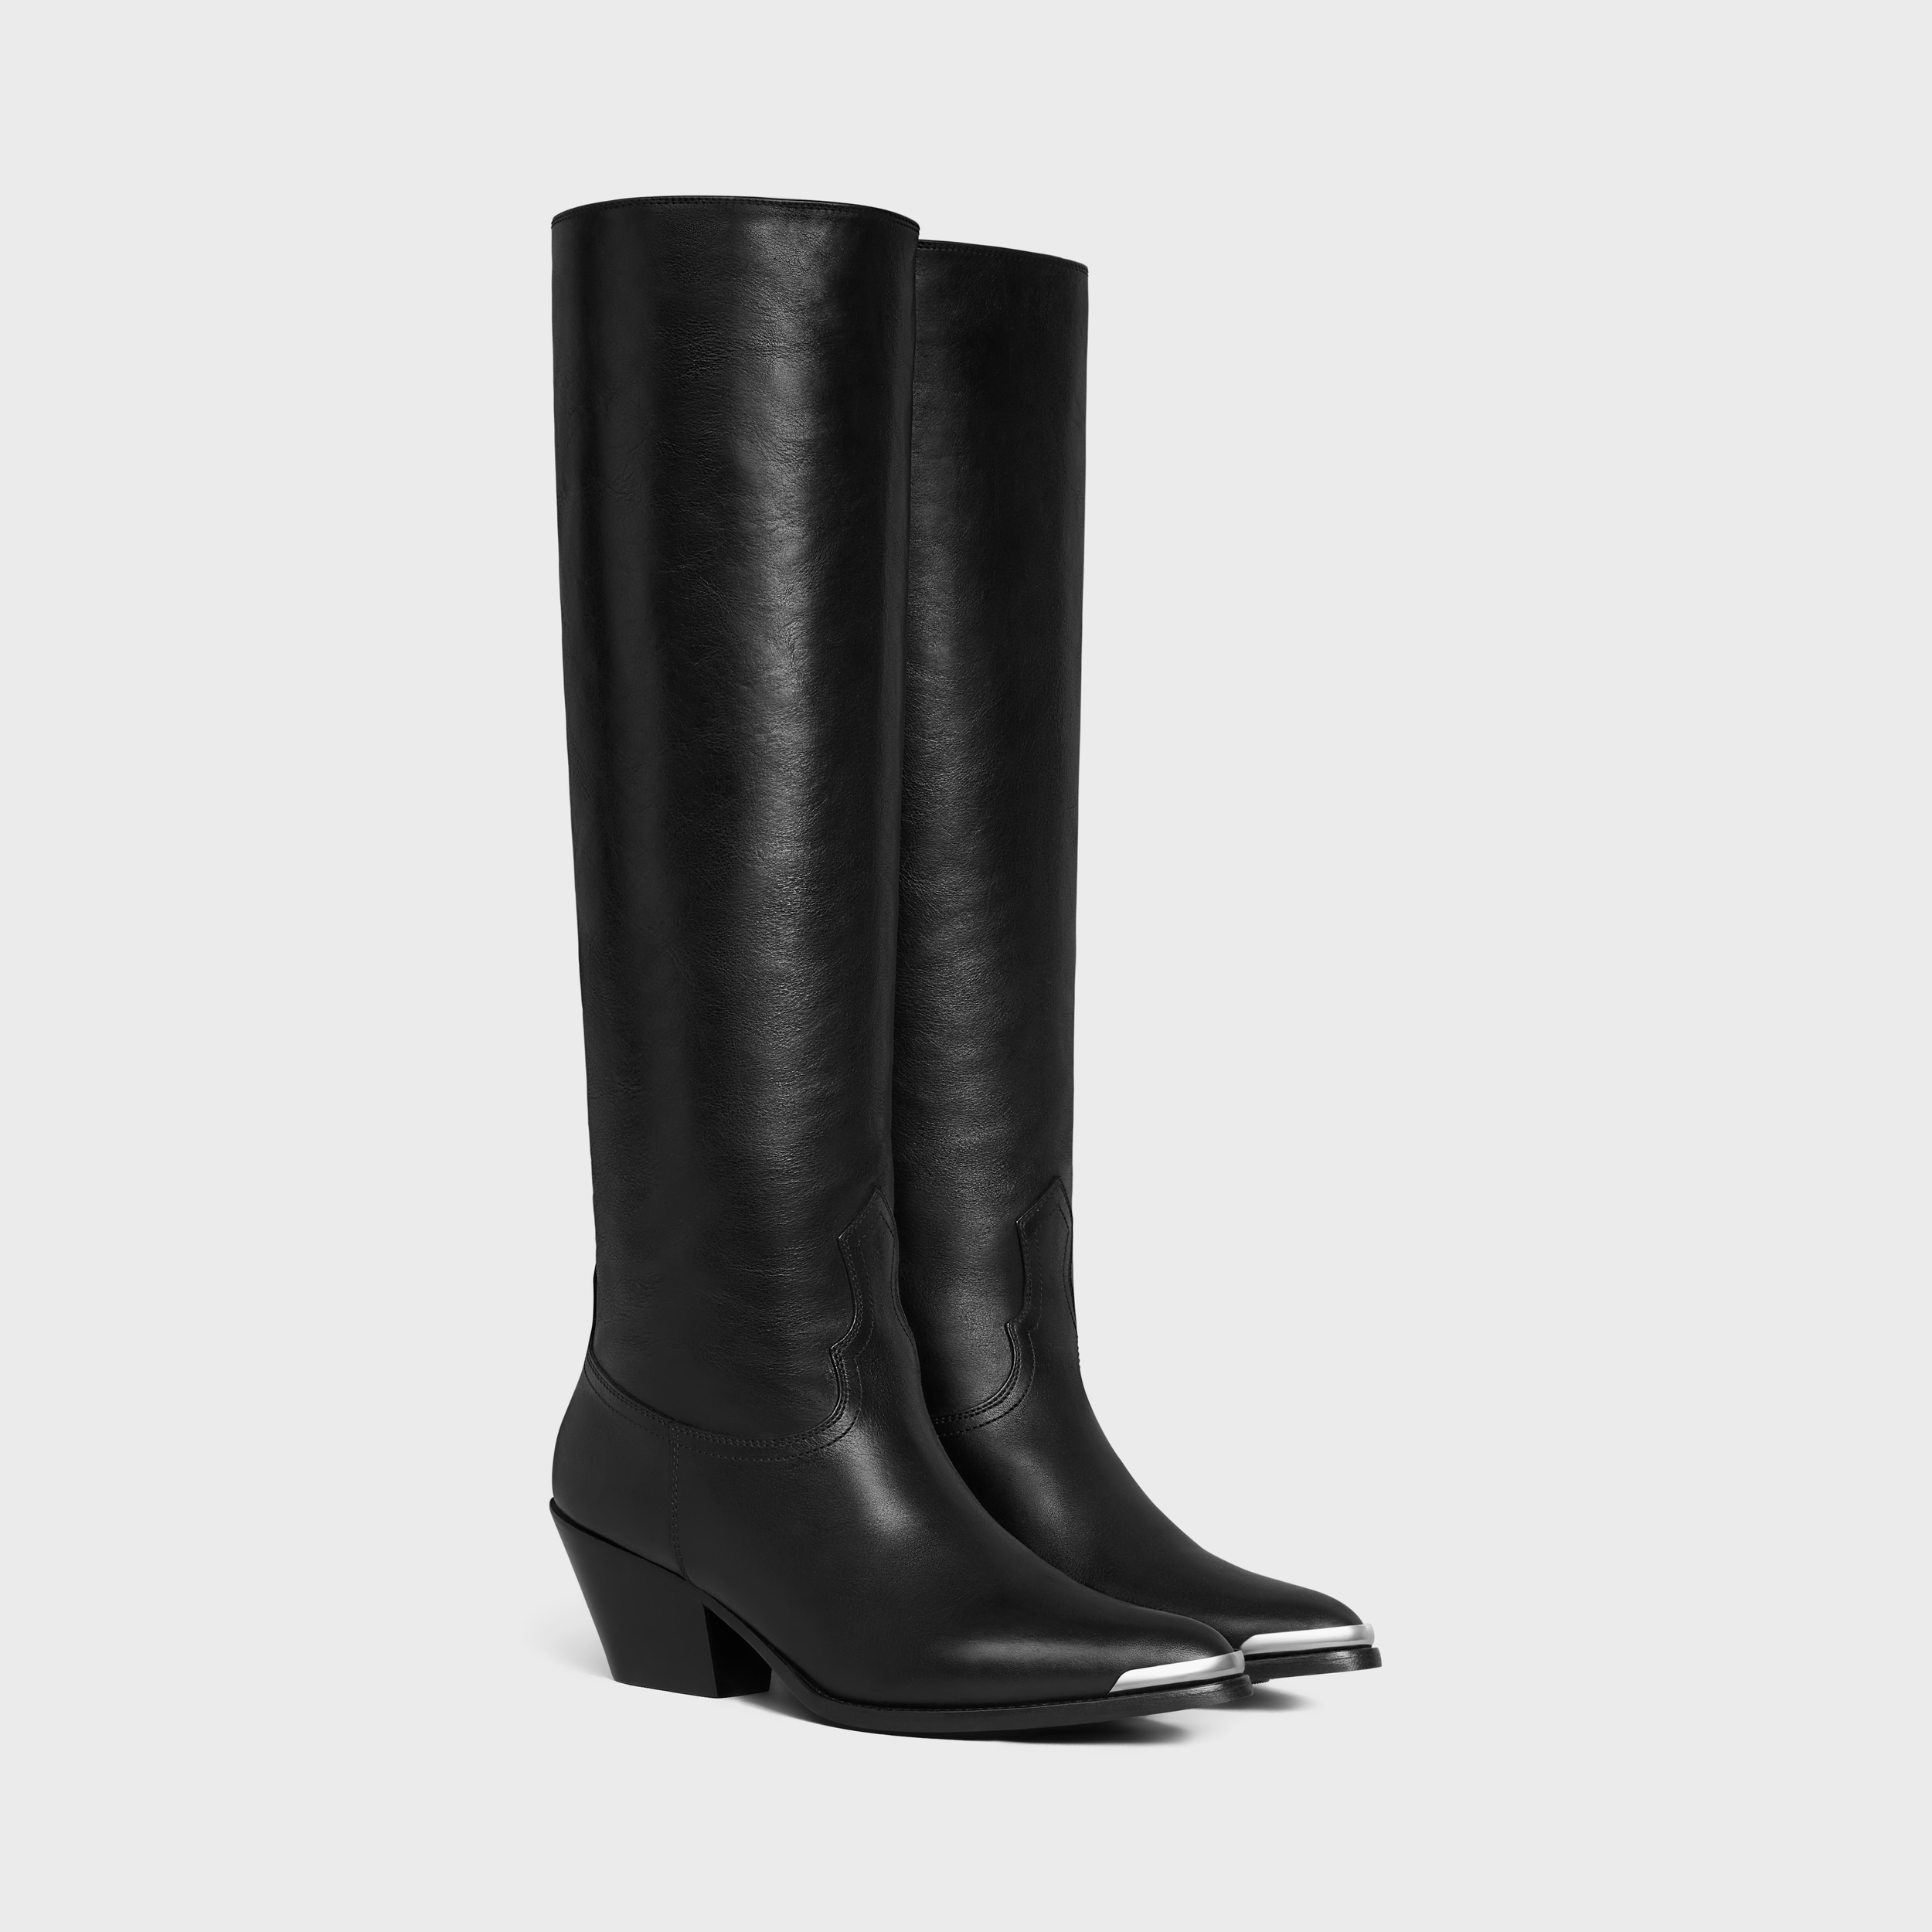 Celine + Western Boots High Boot With Metal Toe in Calfskin